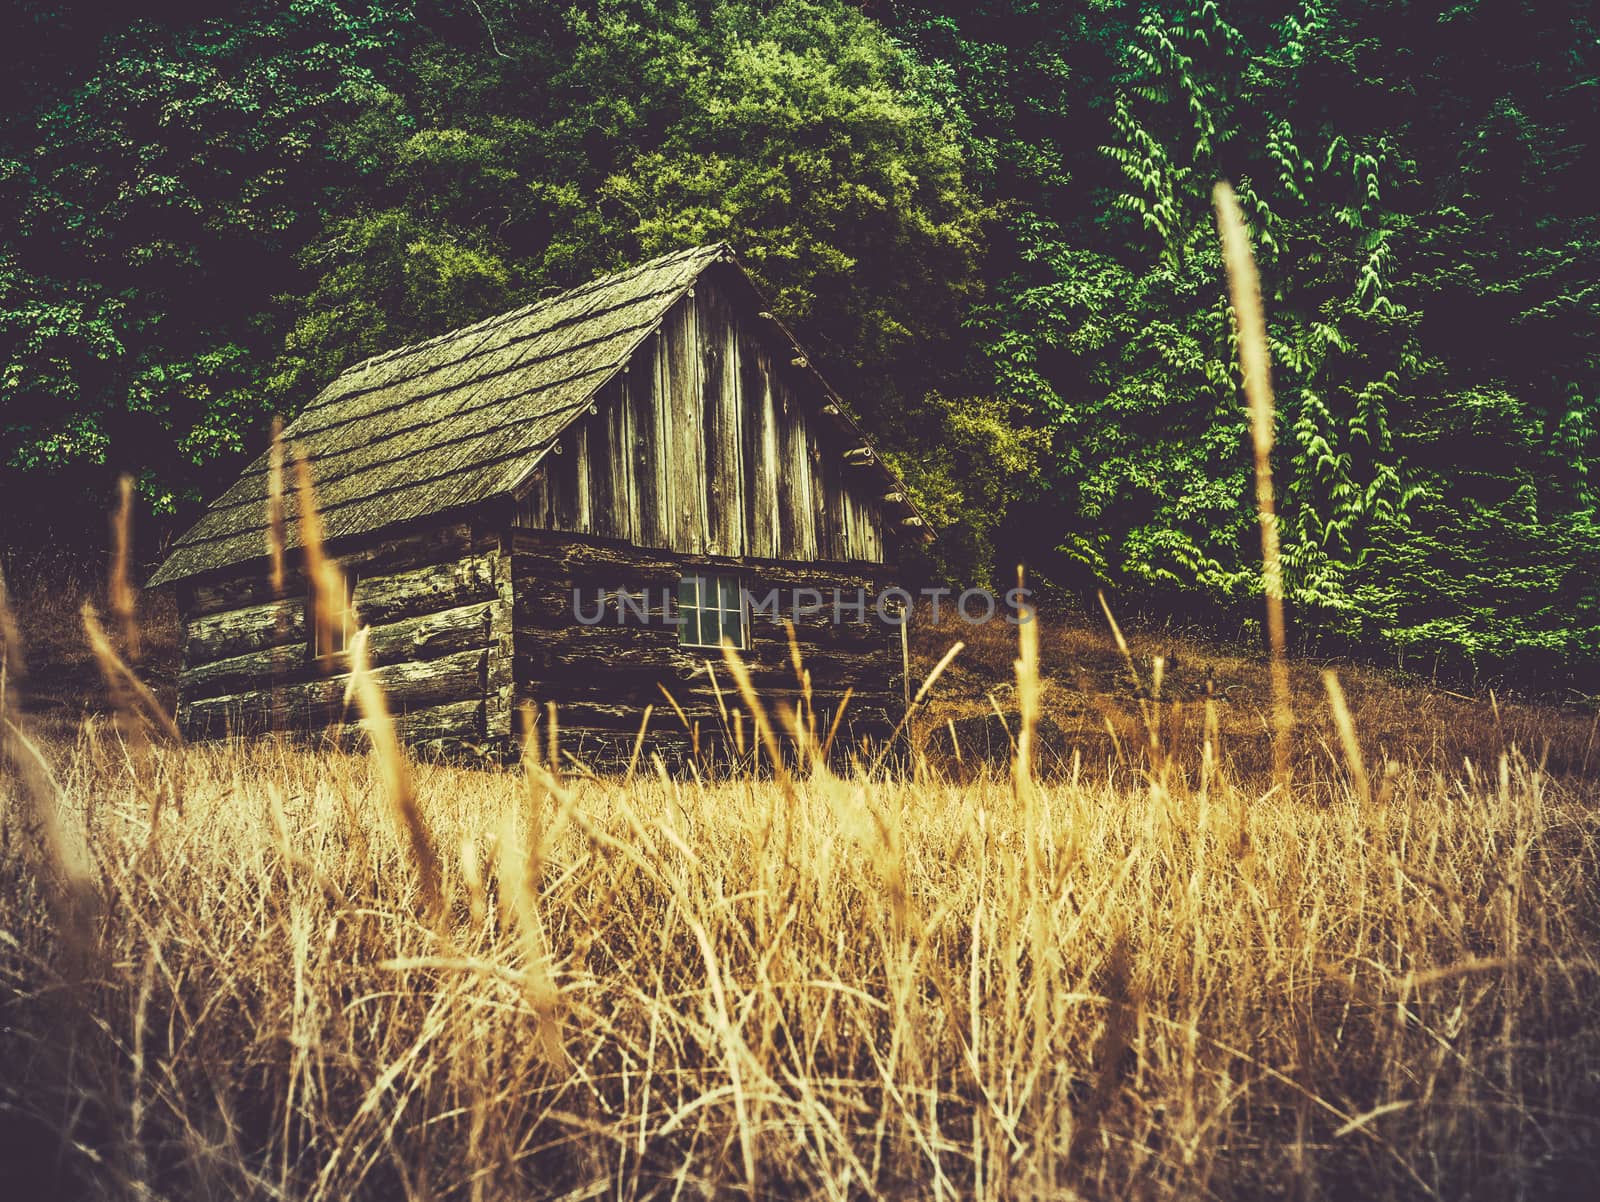 Rustic Old Farm Building Or Barn In A Field Of Grass